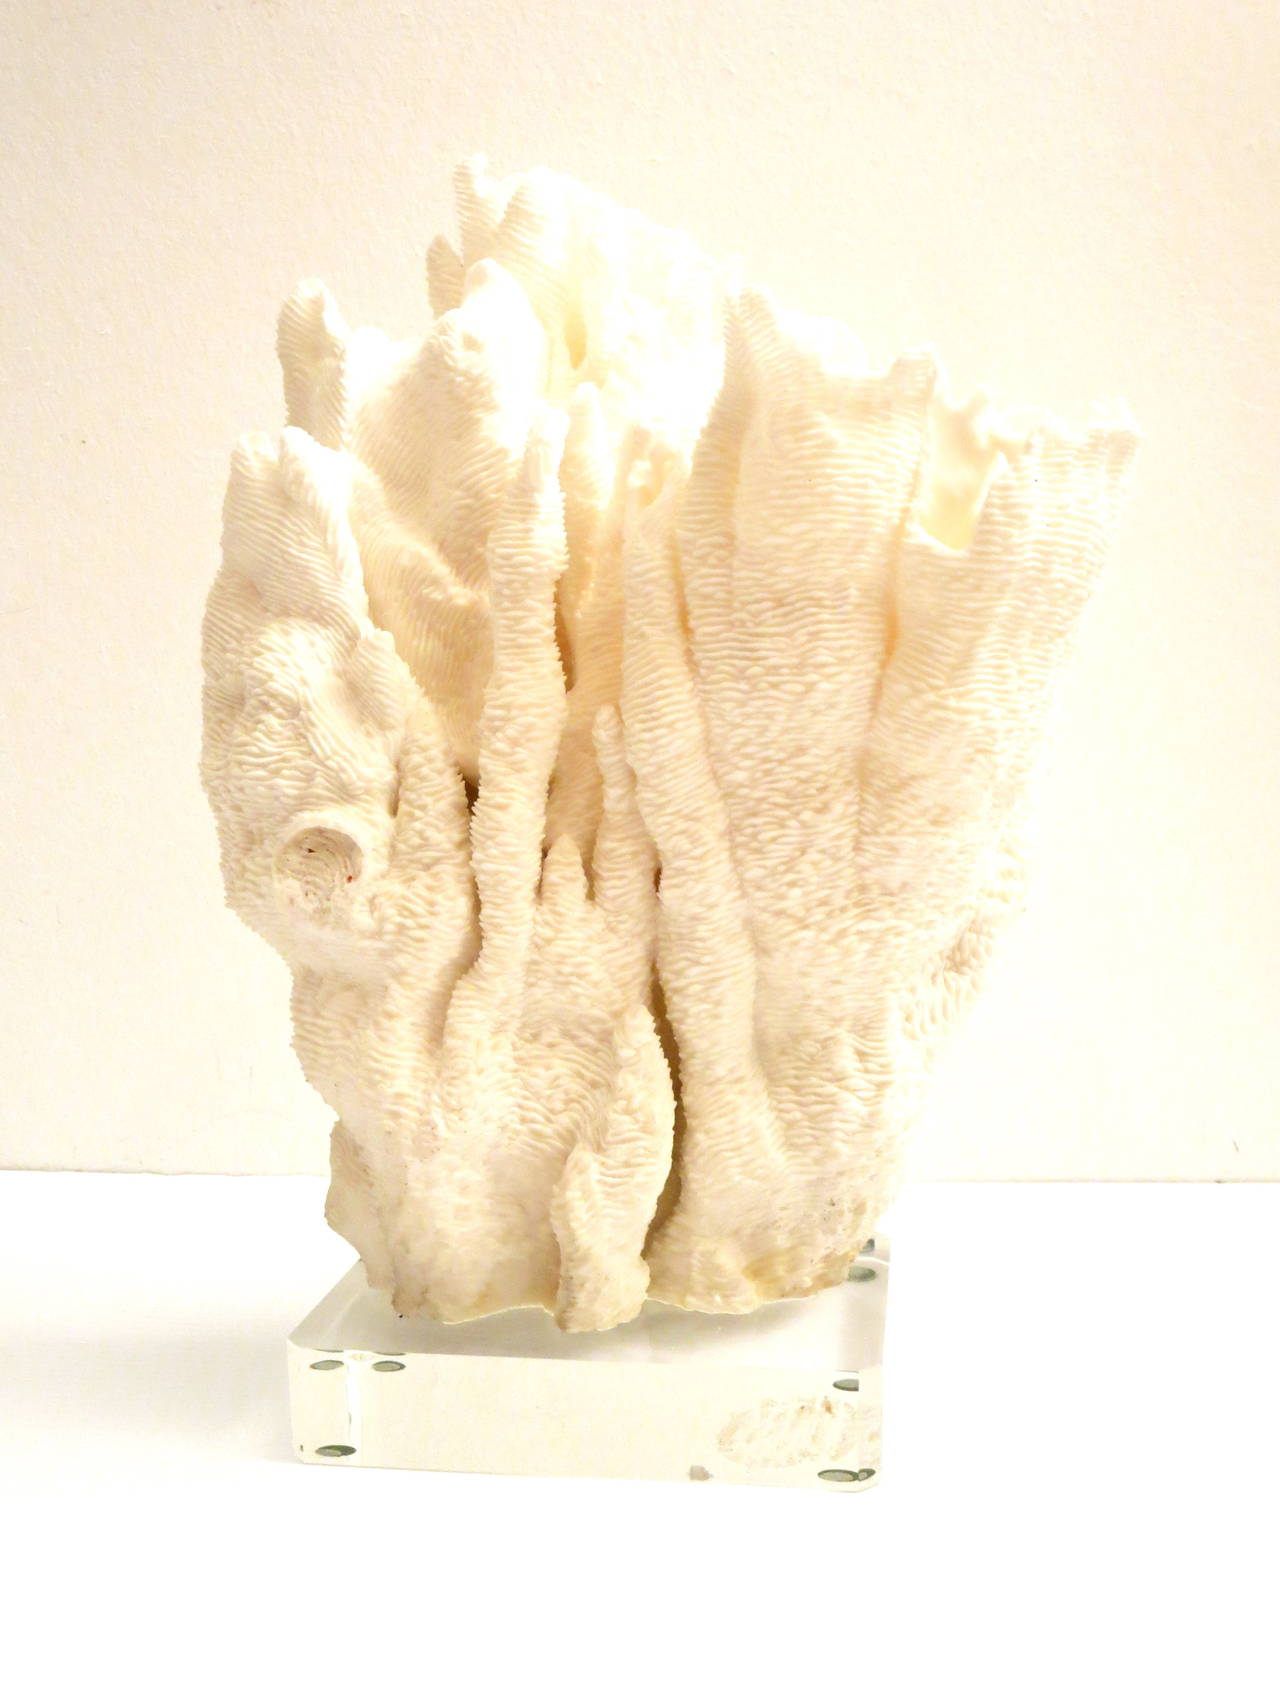 American Bleached Coral Sculptural Specimen Sitting on Thick Lucite Base